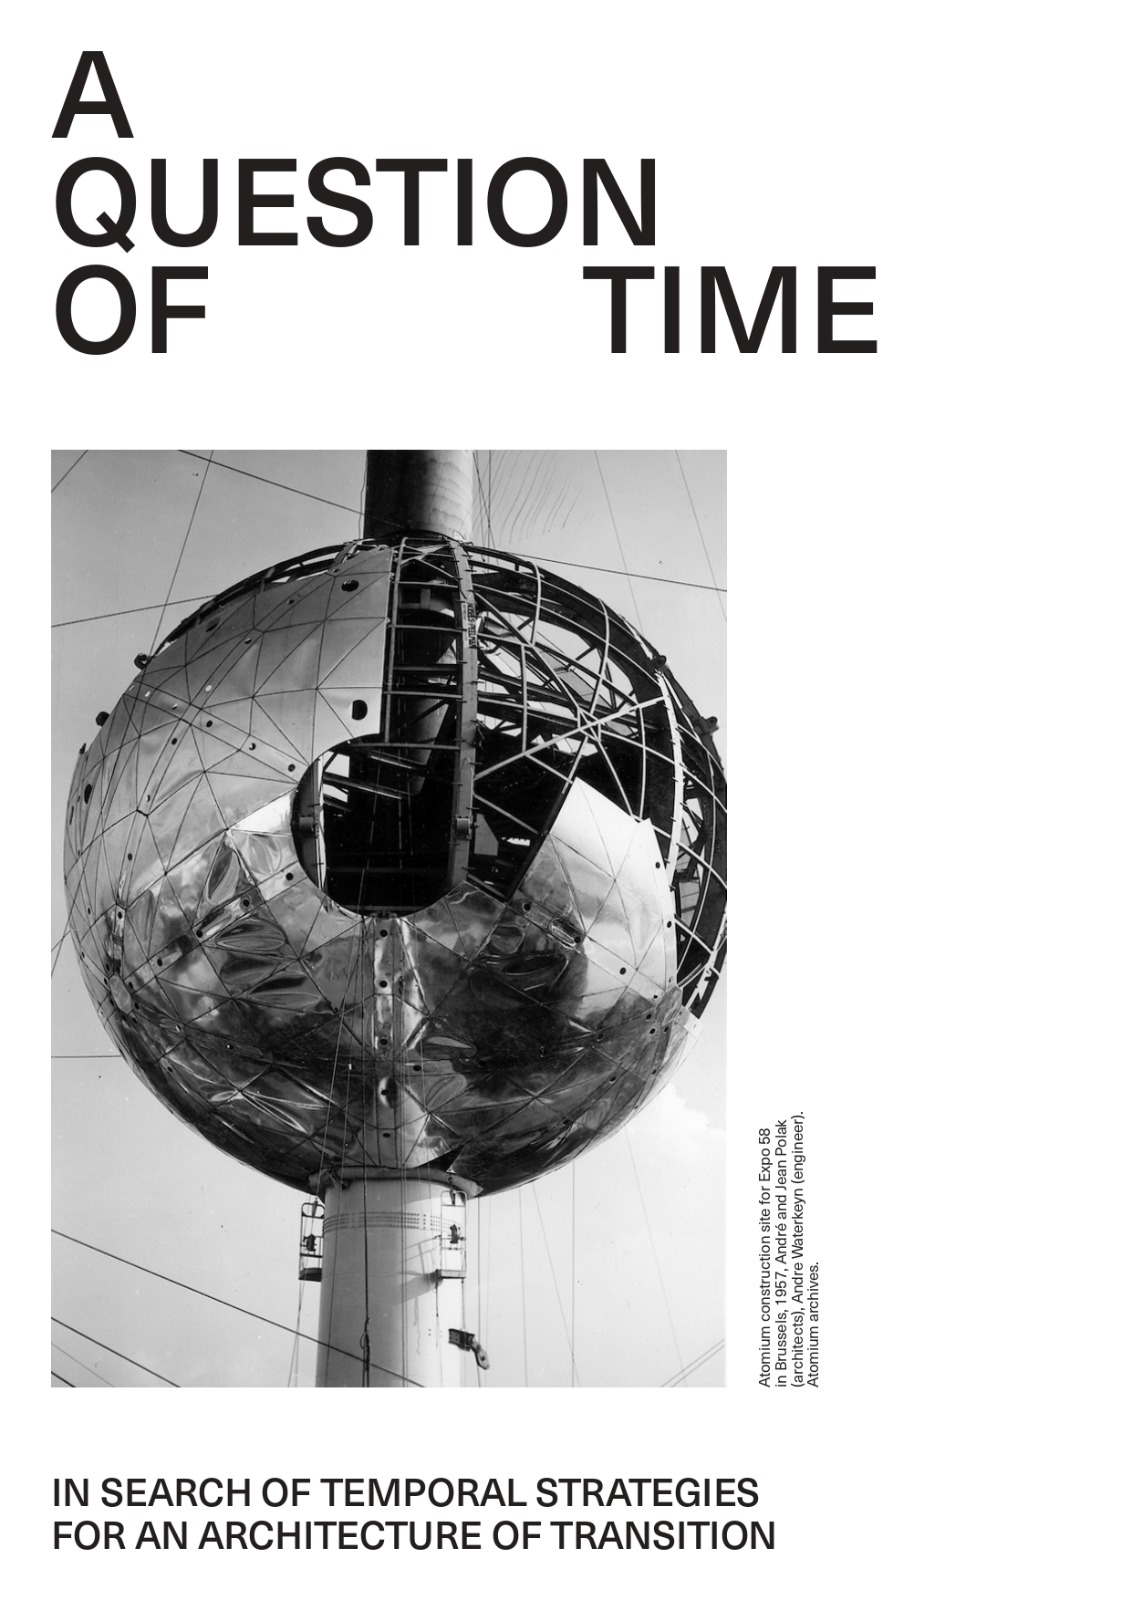 Simposio “A Question of Time. In Search of Temporal Strategies for an Architecture of Transition”.